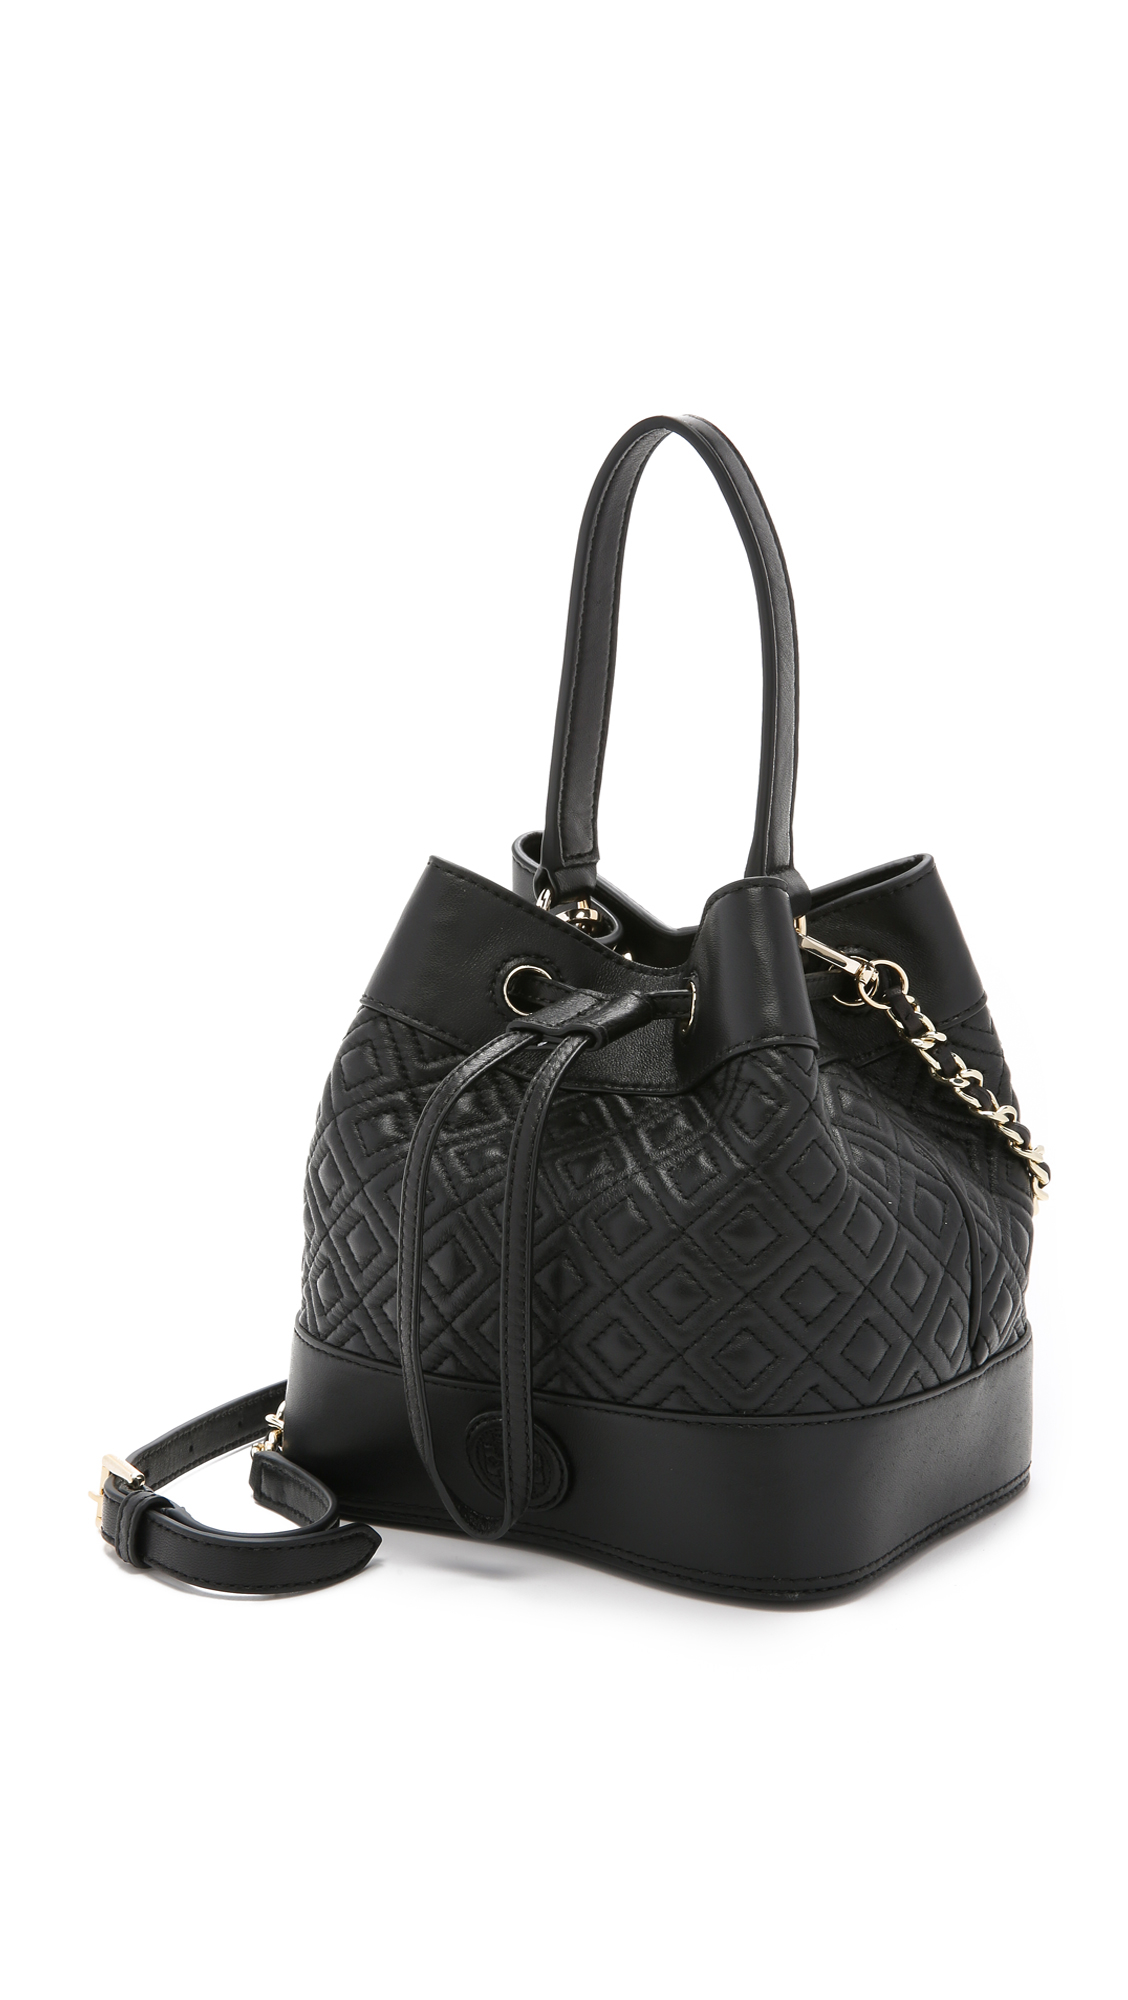 Lyst - Tory Burch Marion Quilted Mini Bucket Bag - Black in Black